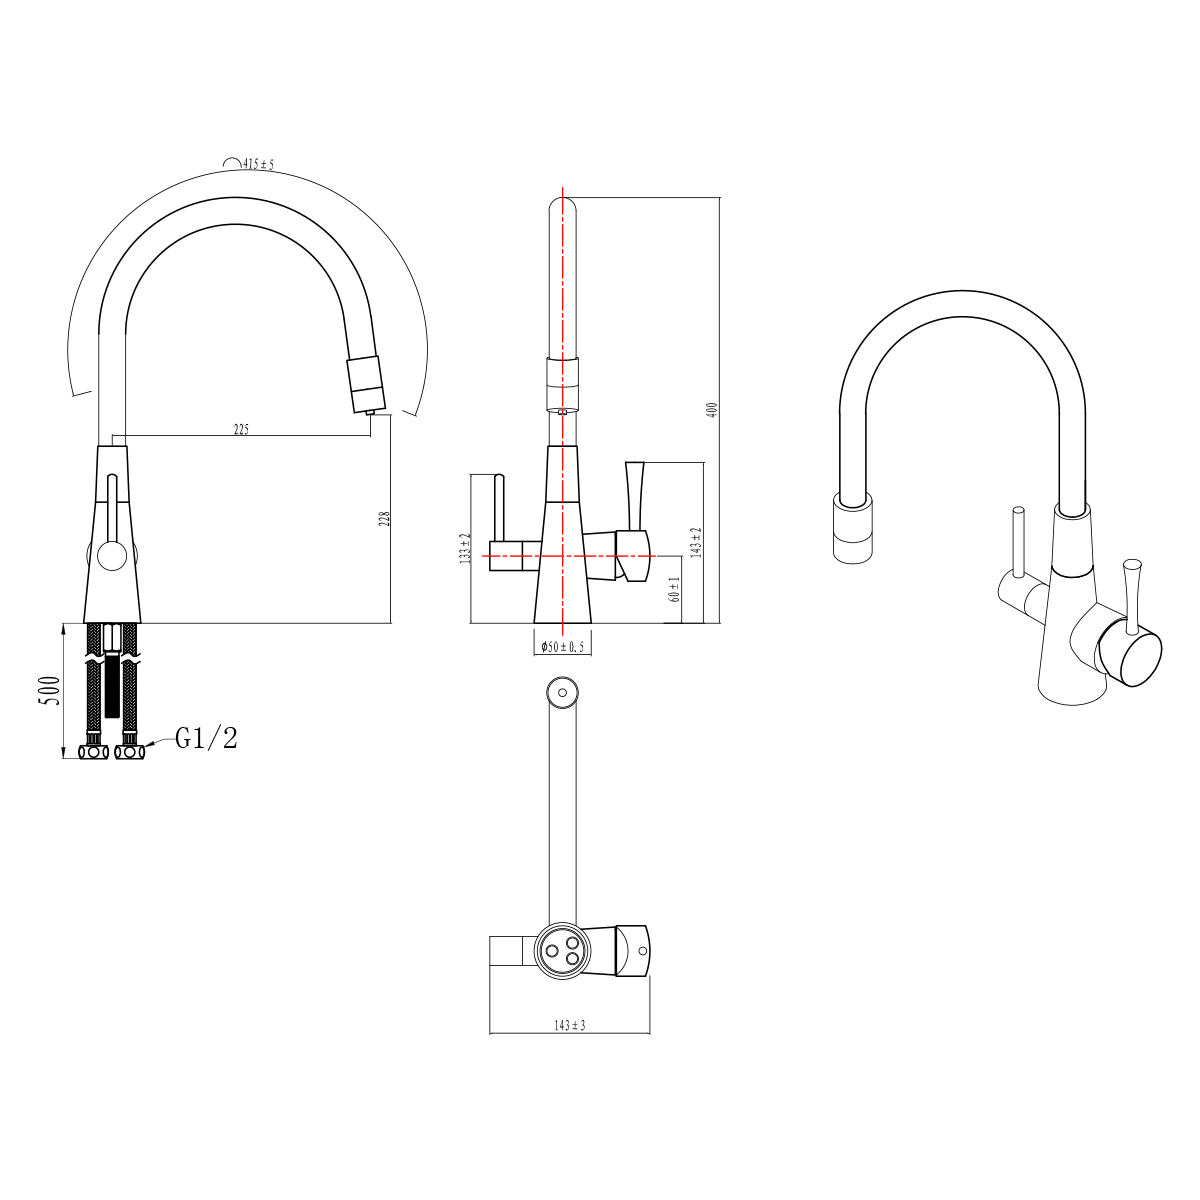 LM3075GM Kitchen faucet with connection to drinkingwater supply